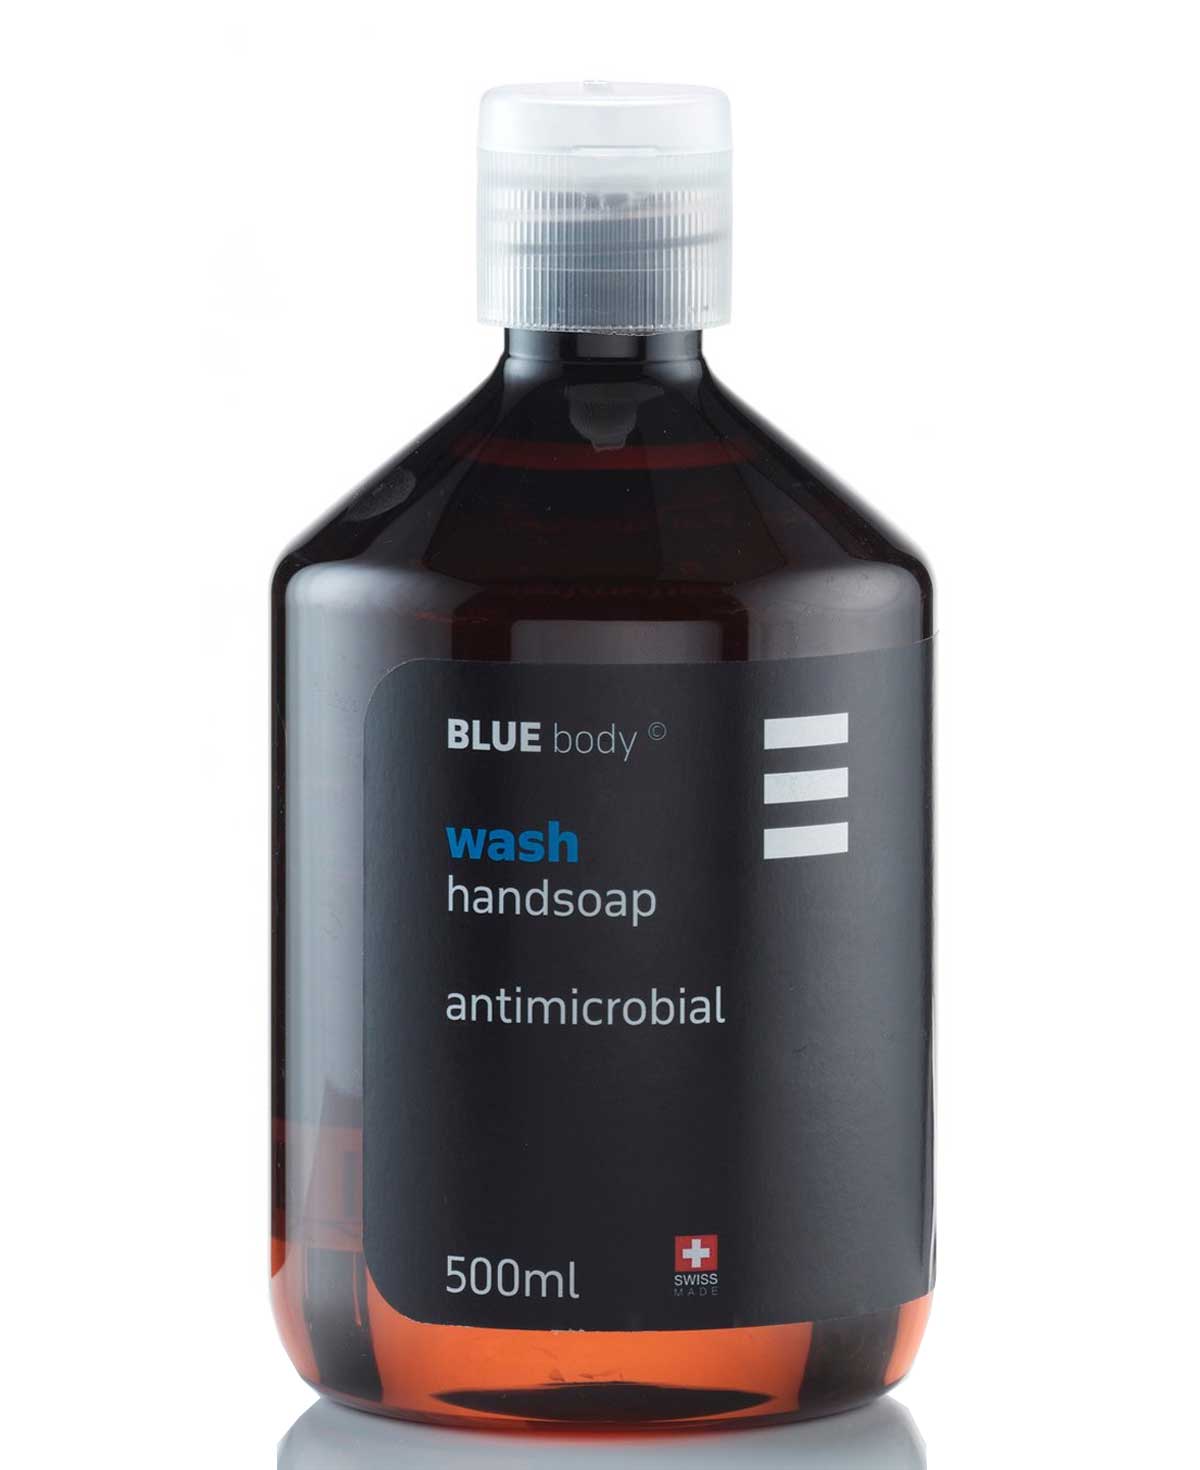 BLUE body wash handsoap antimicrobial 500ml